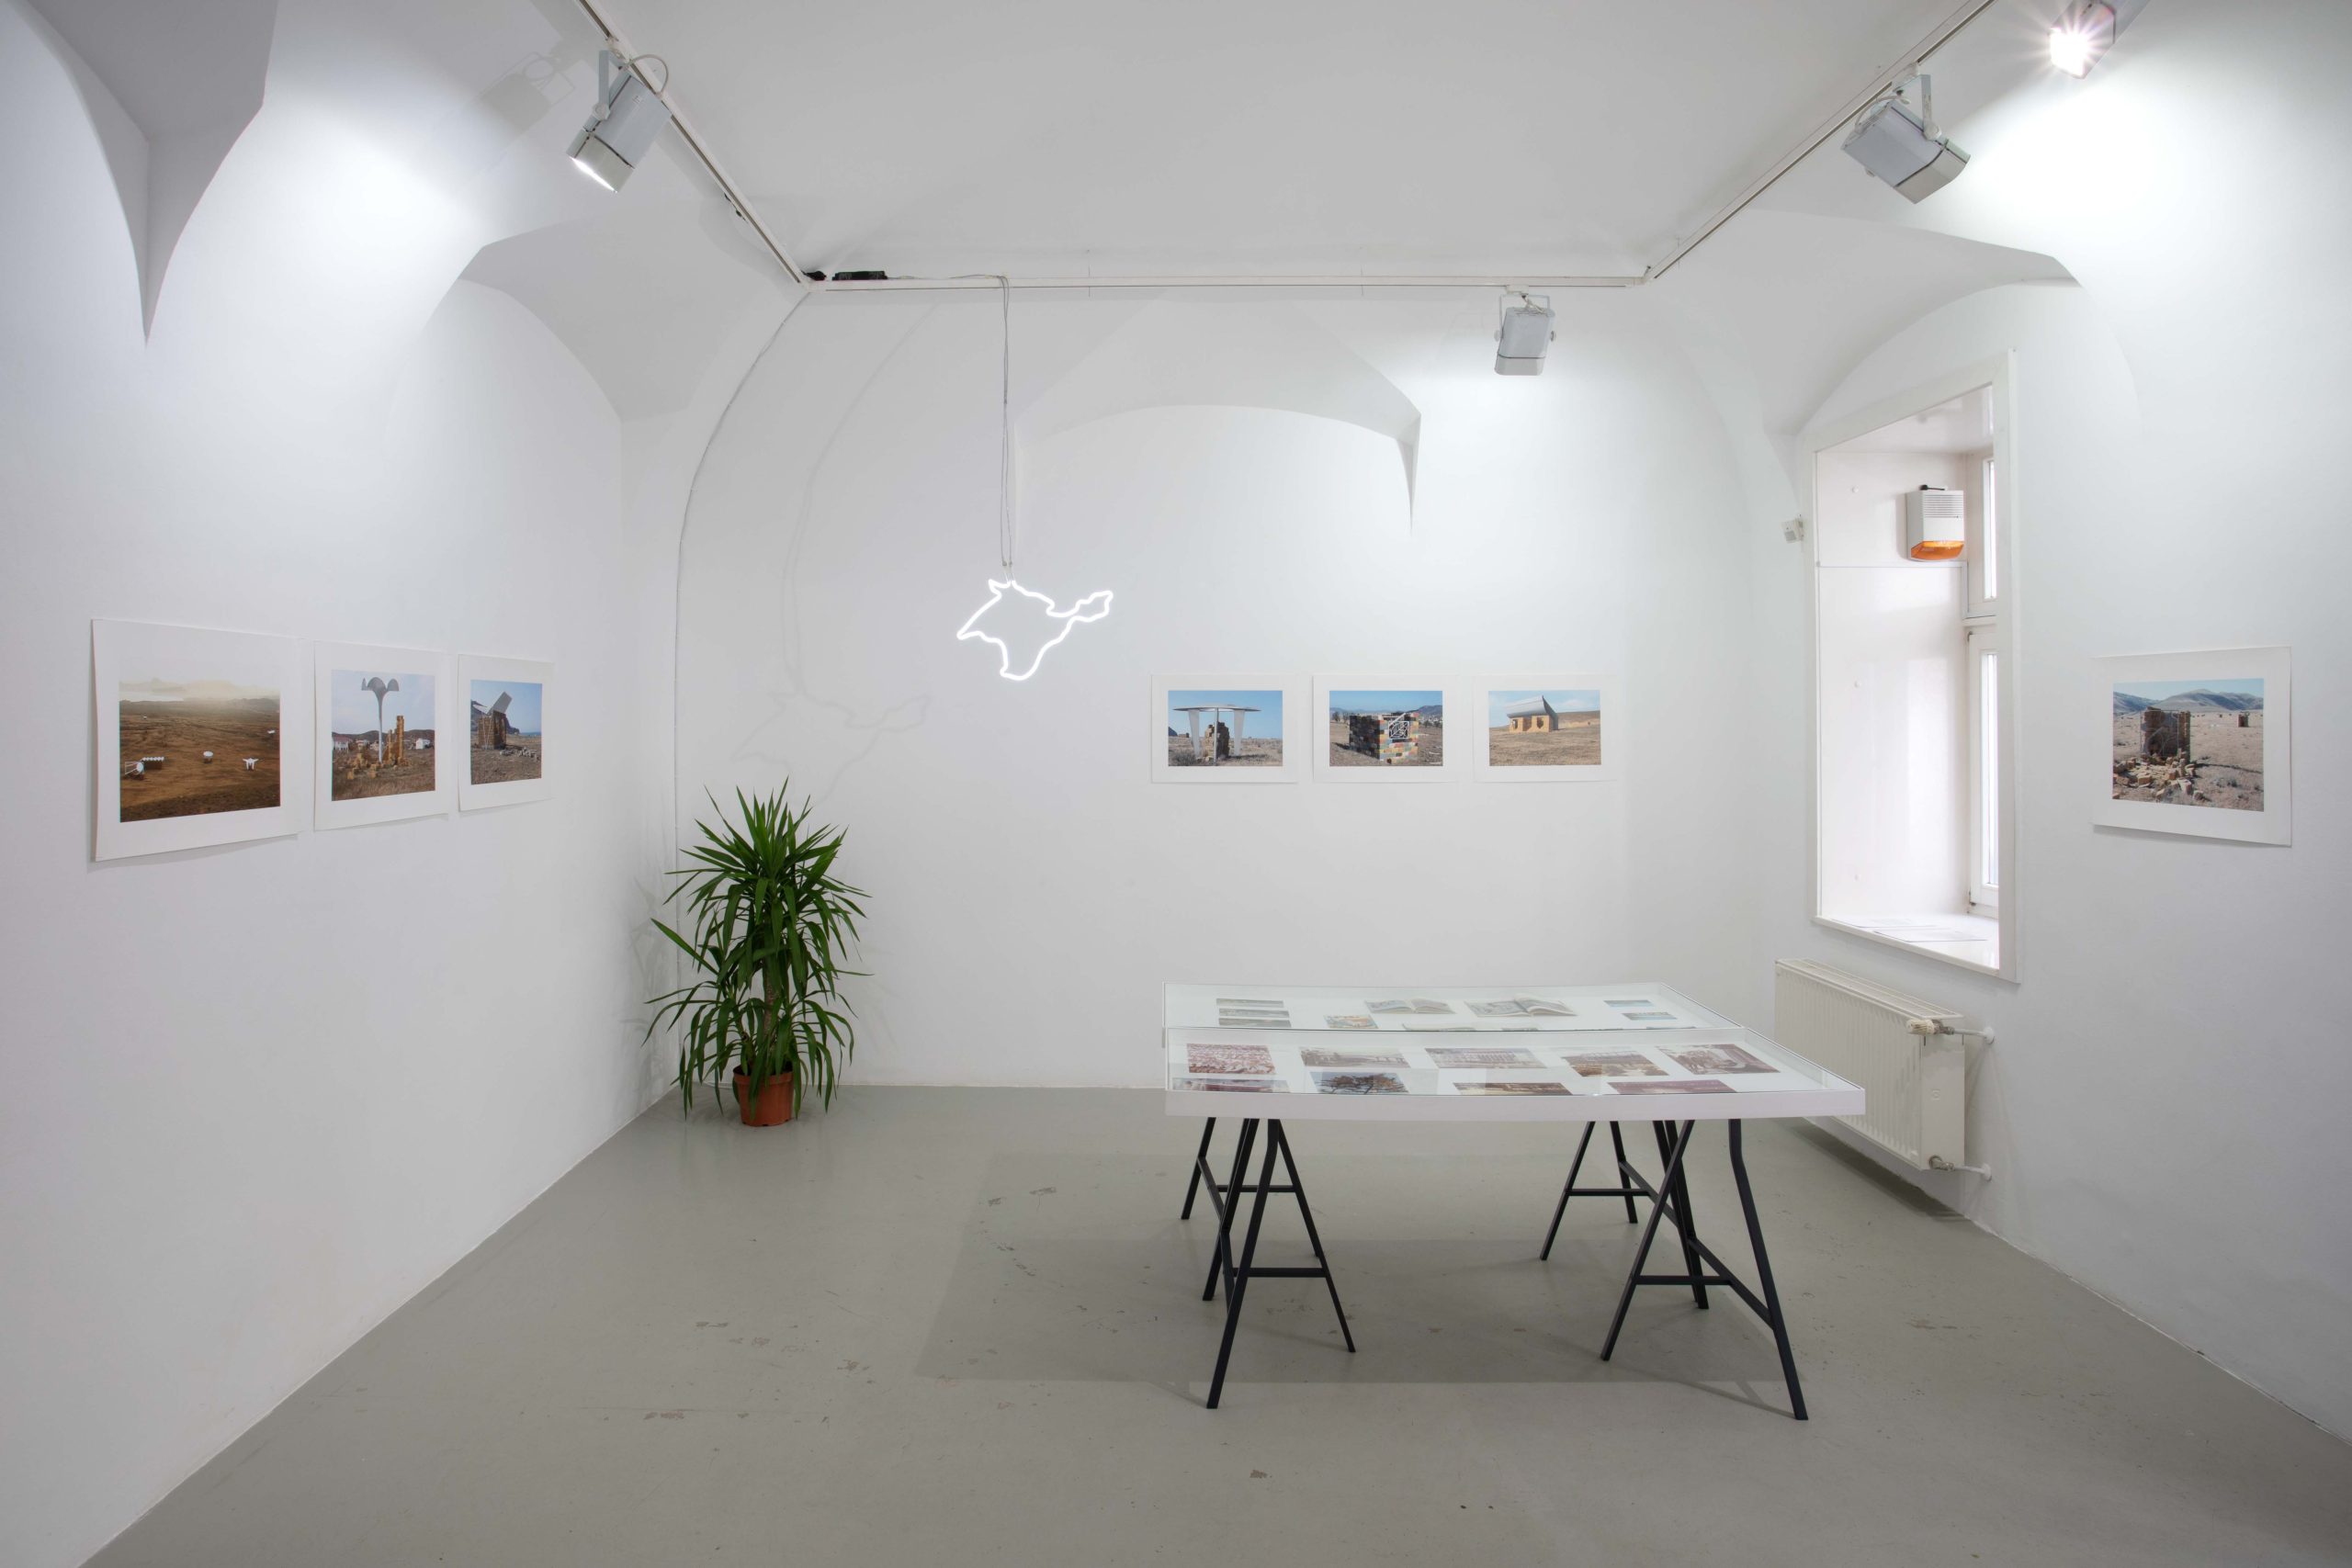 Other echoes inhabit the garden_installation view with works by Nikita Kadan_Kisterem_2019_2